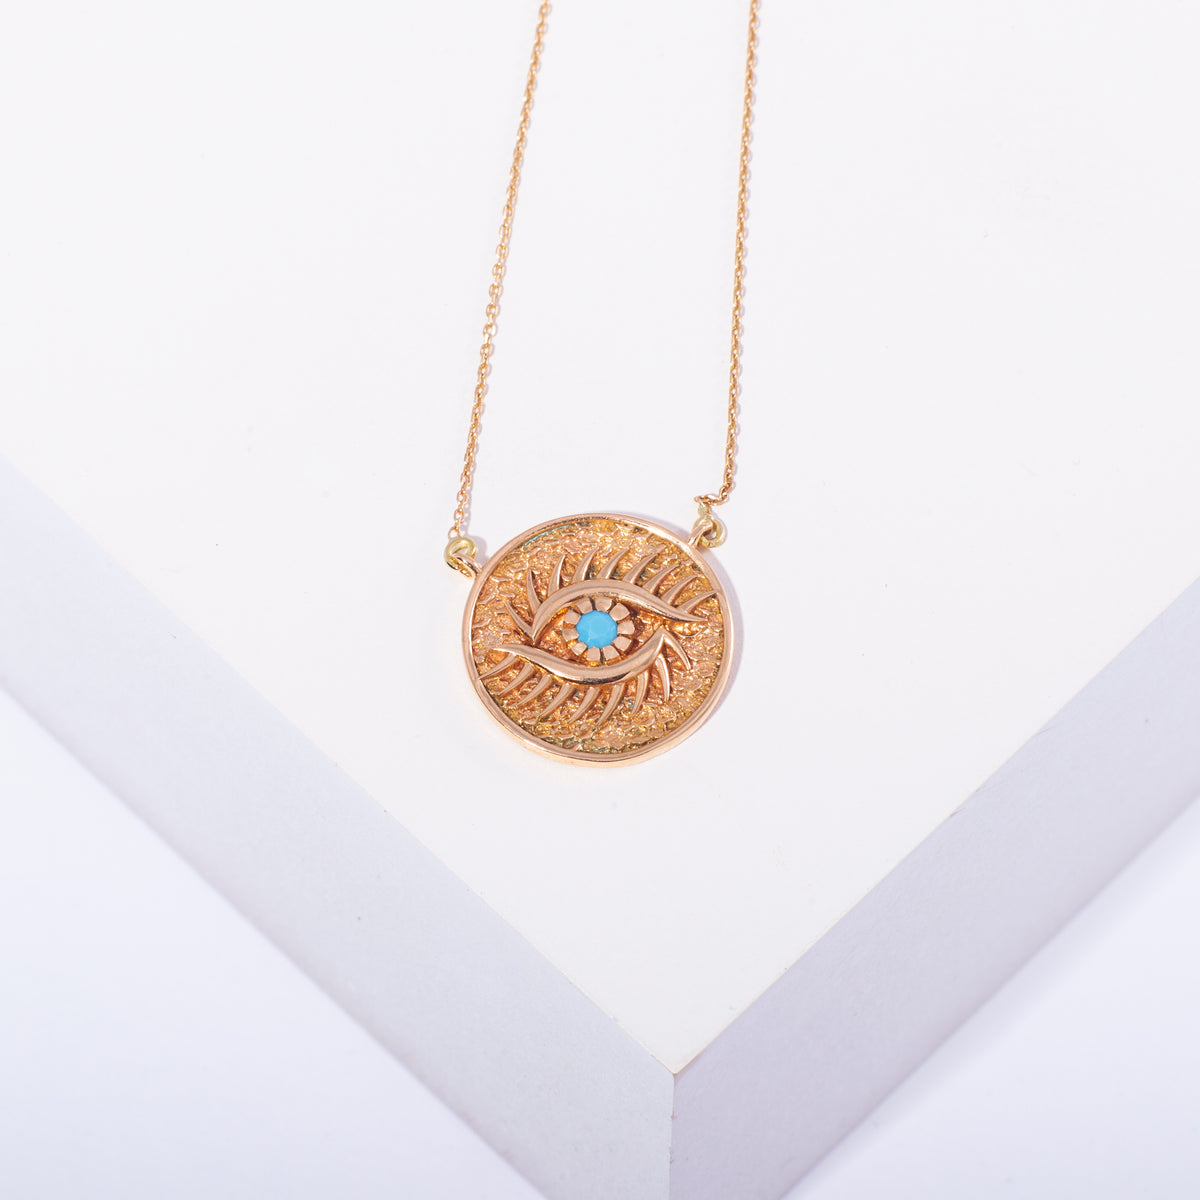 Coined Necklace